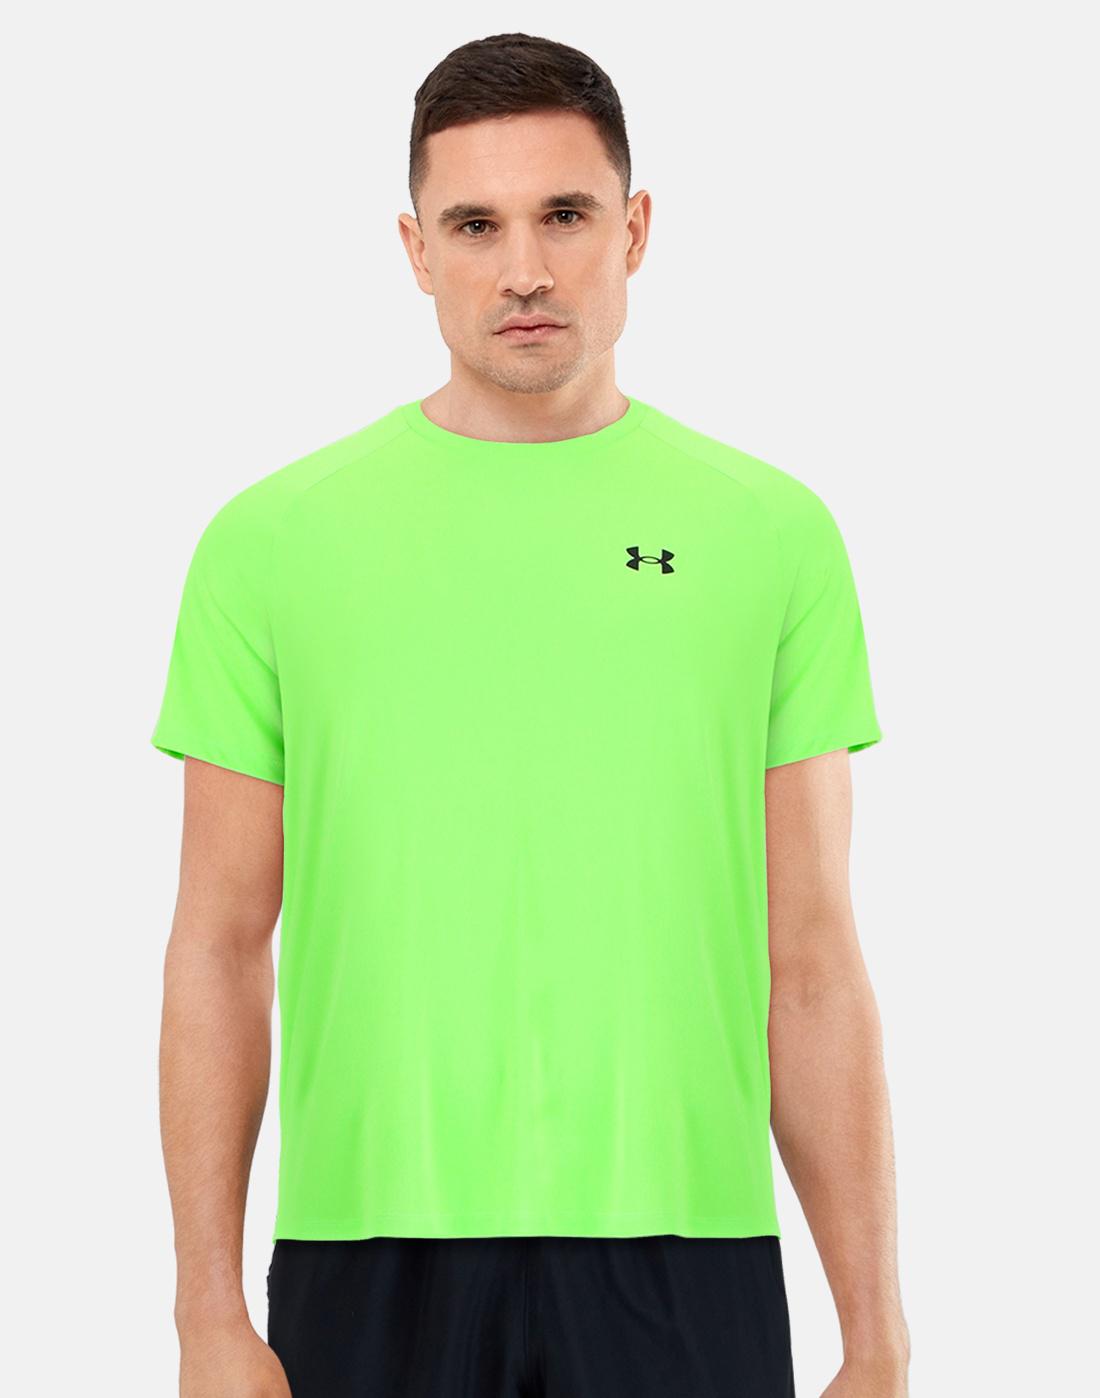 Under Armour Mens Tech 2.0 T-Shirt - Green | Life Style Sports UK